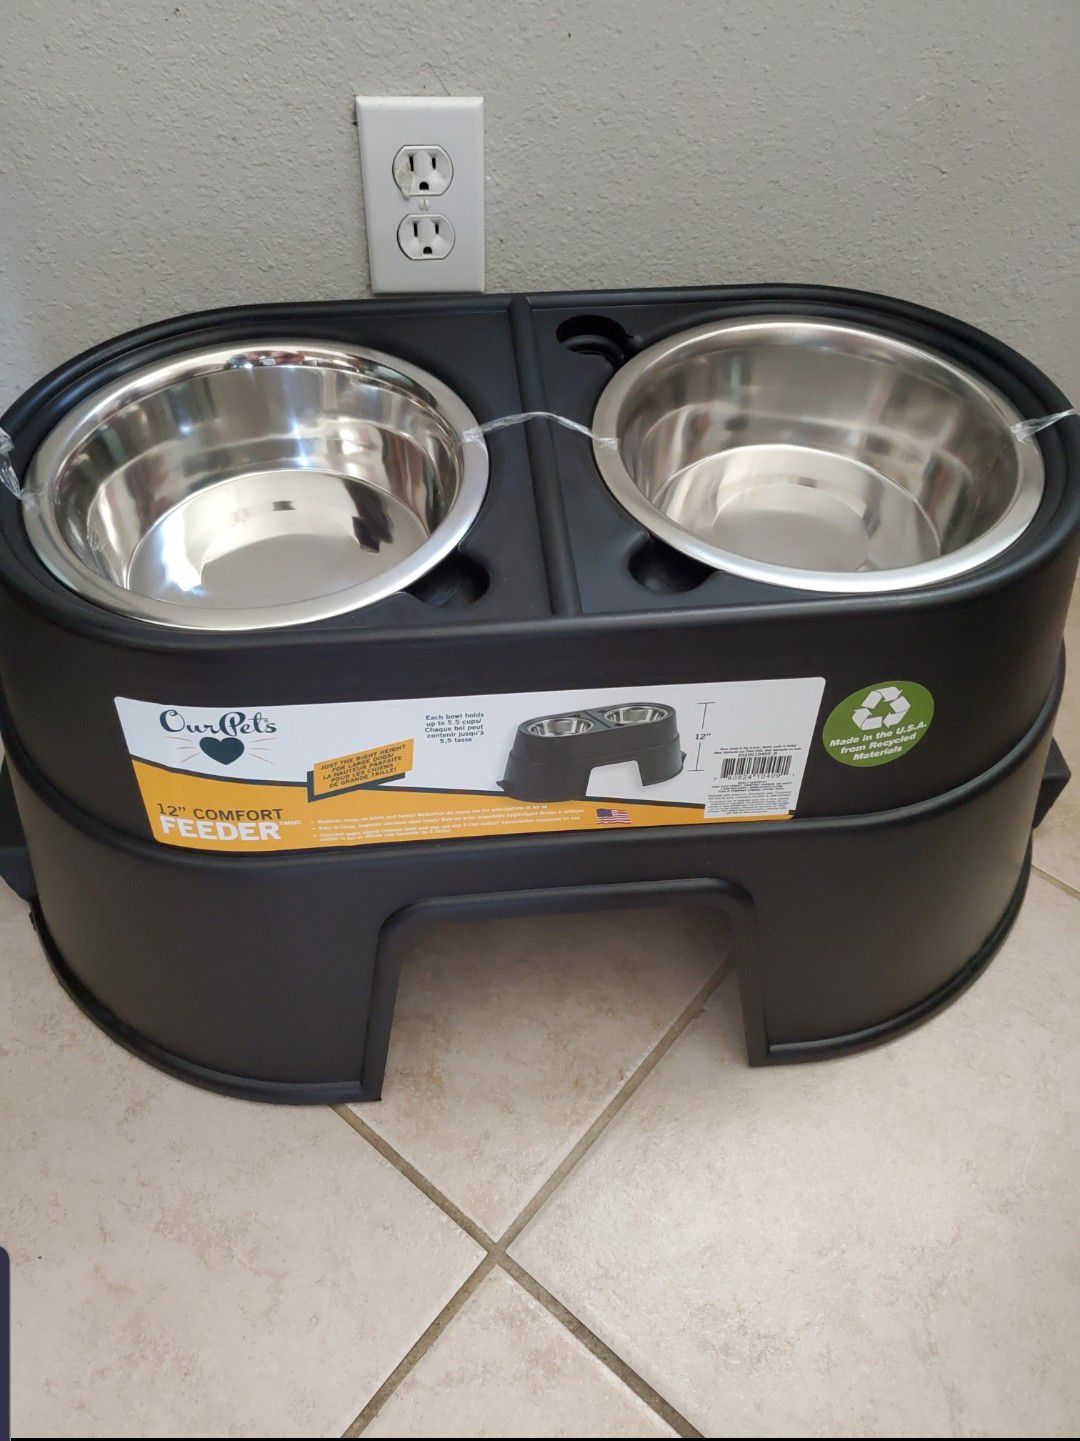 ELEVATED 12 INCH STAINLESS STEEL COMFORT FEEDER